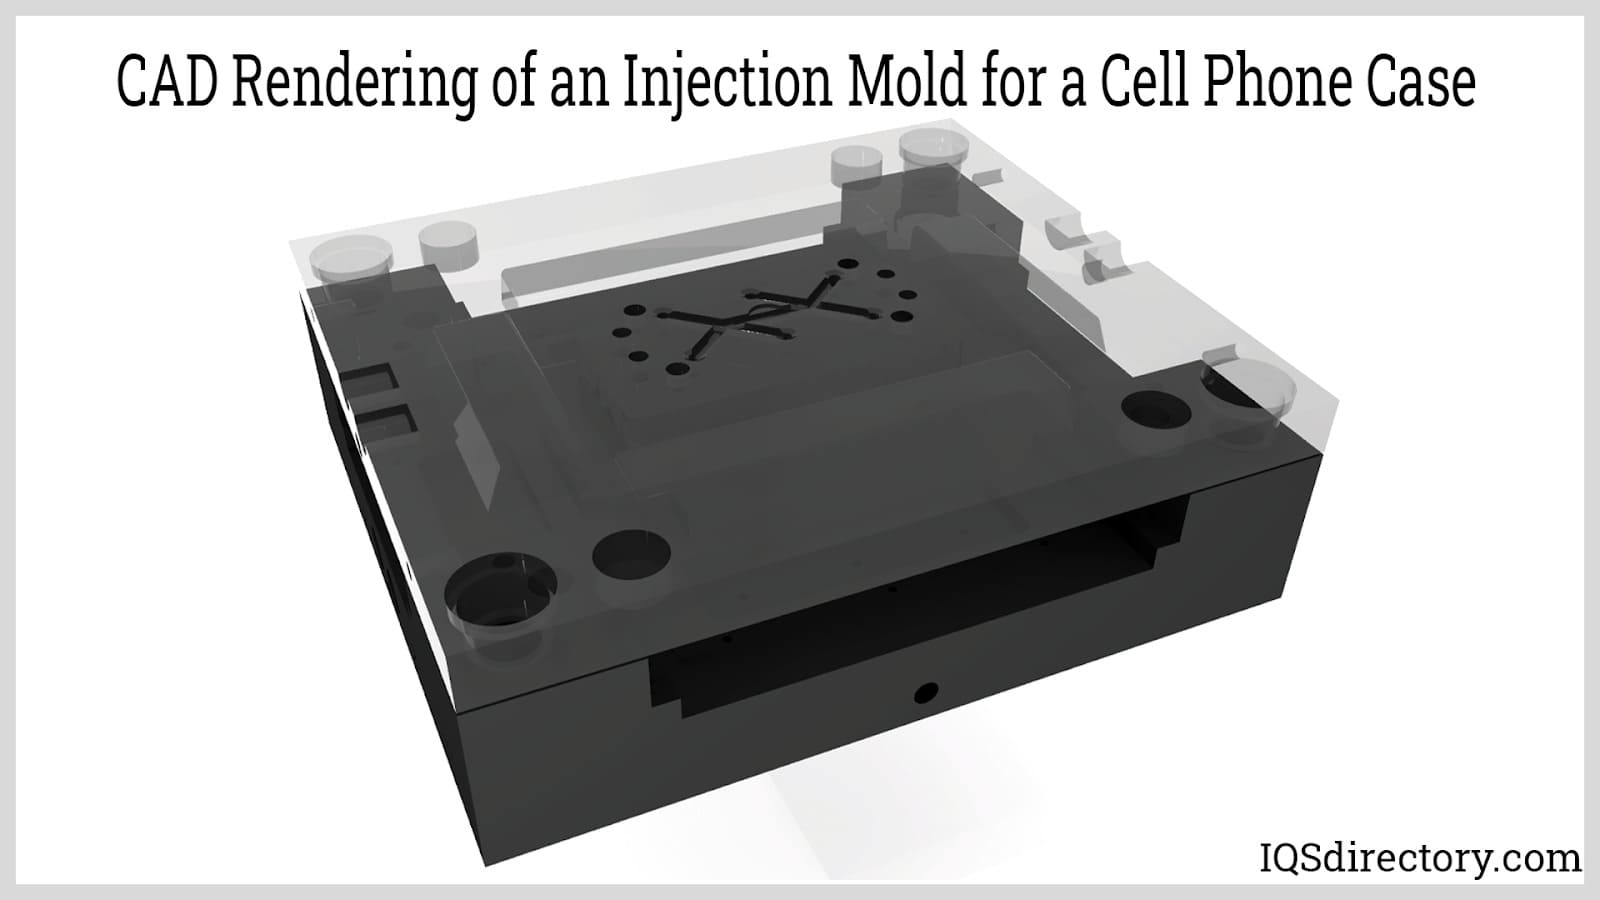 CAD Rendering of an Injection Mold for a Cell Phone Case